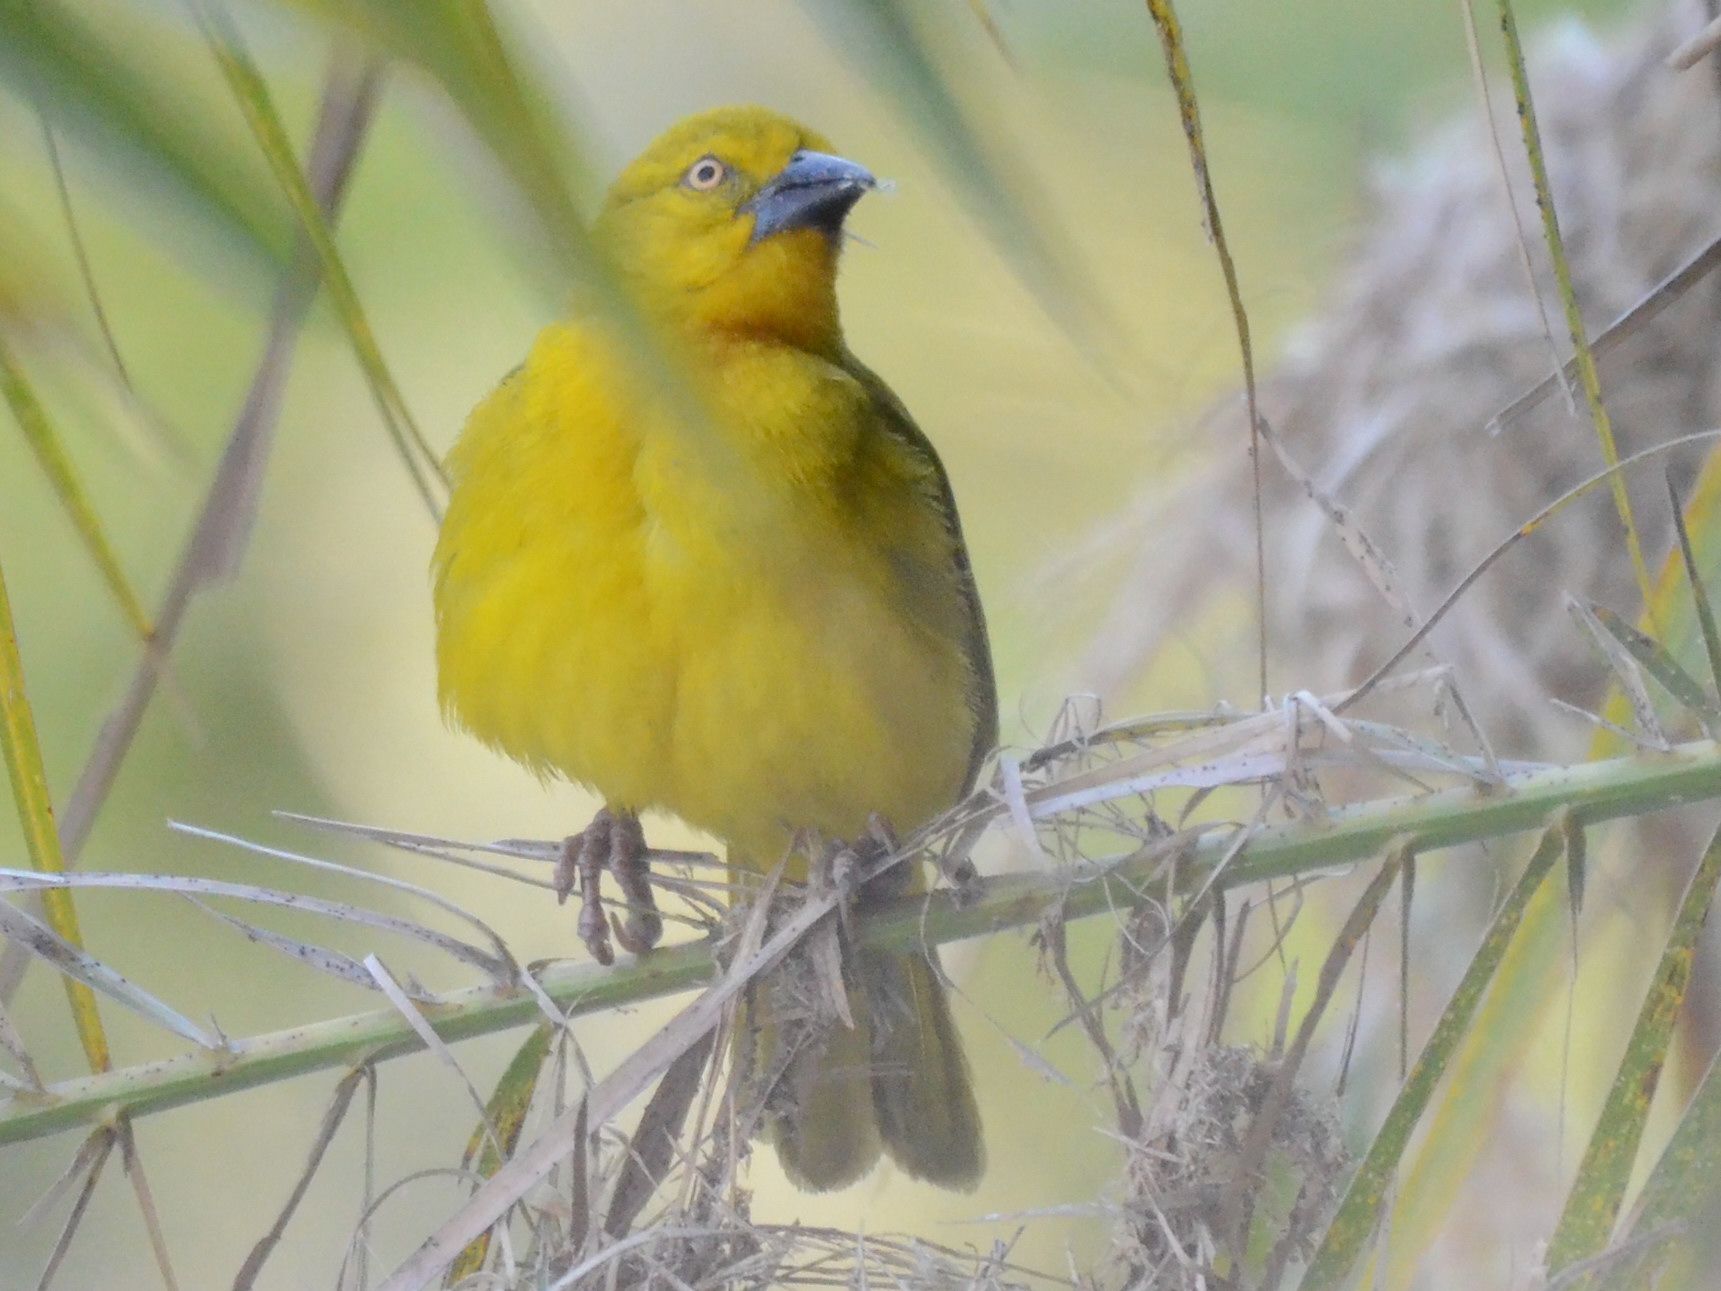 Click picture to see more Holubs( African) Golden Weavers.